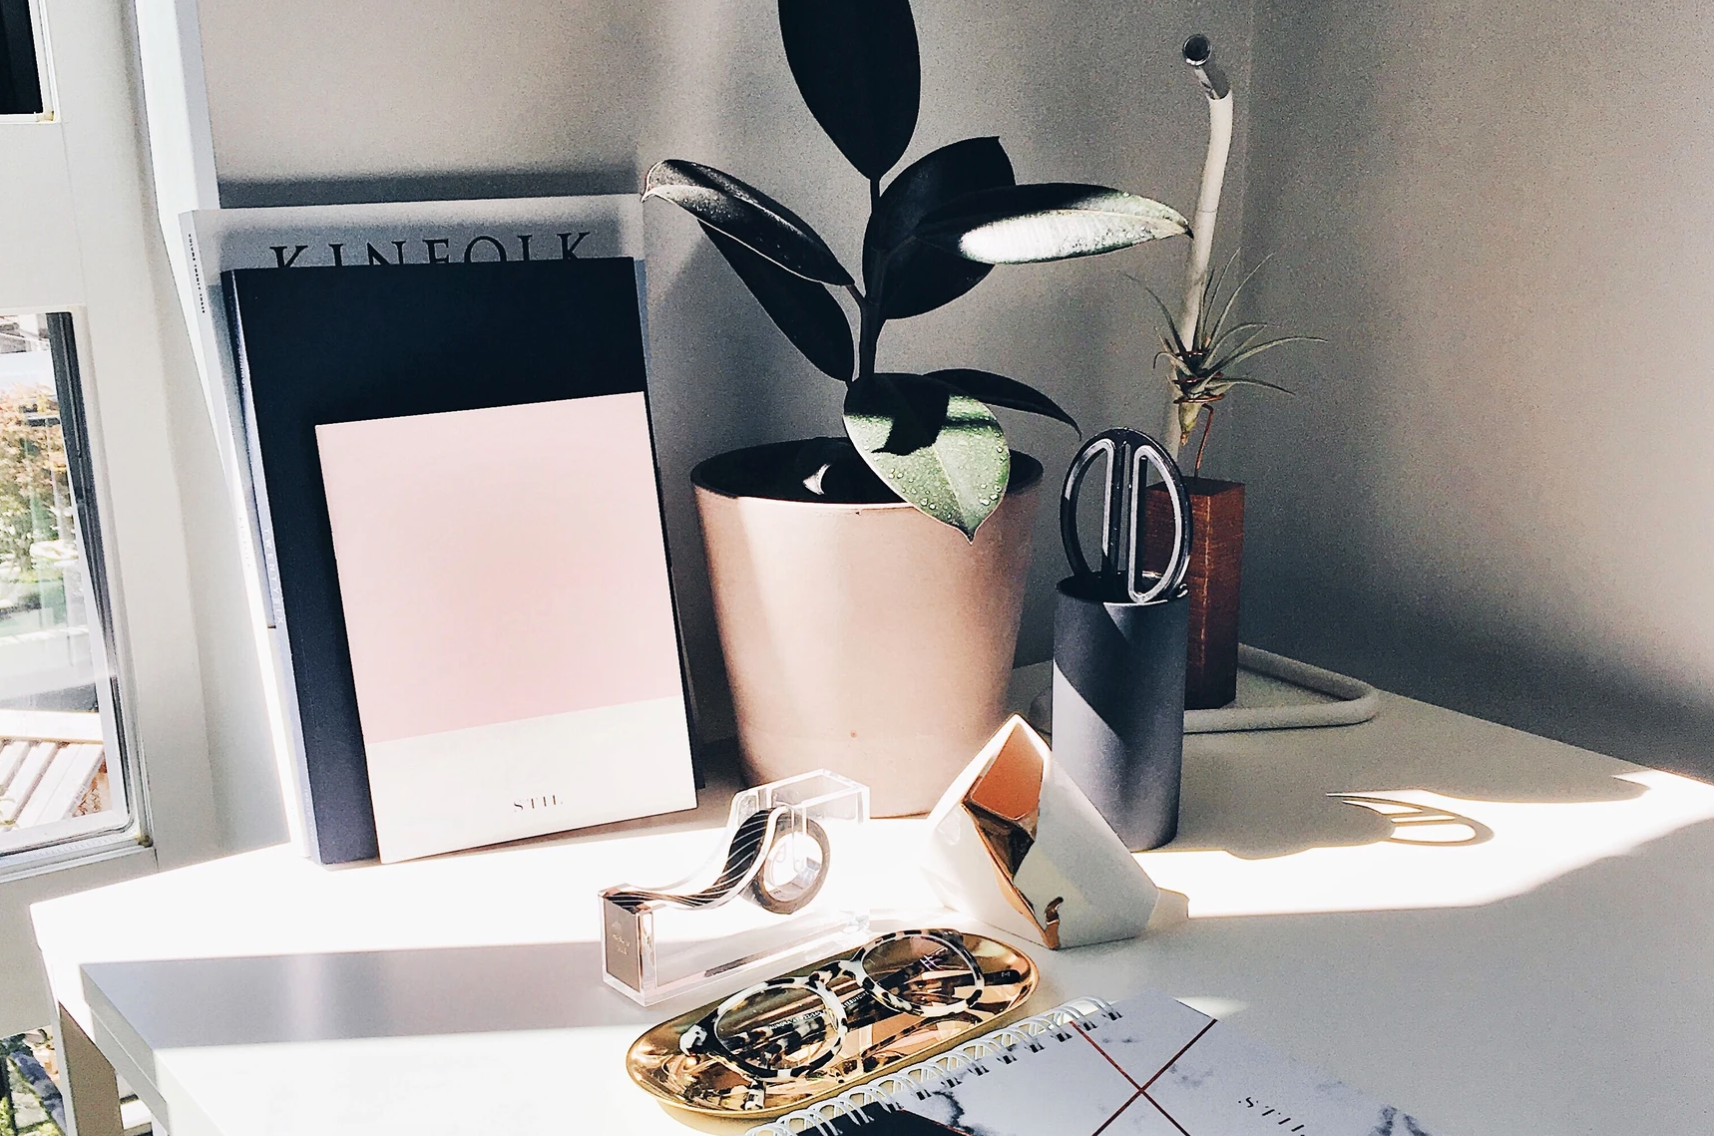 Work from home office desk space next to a window with sunlight, with stationary, a plant and books on top